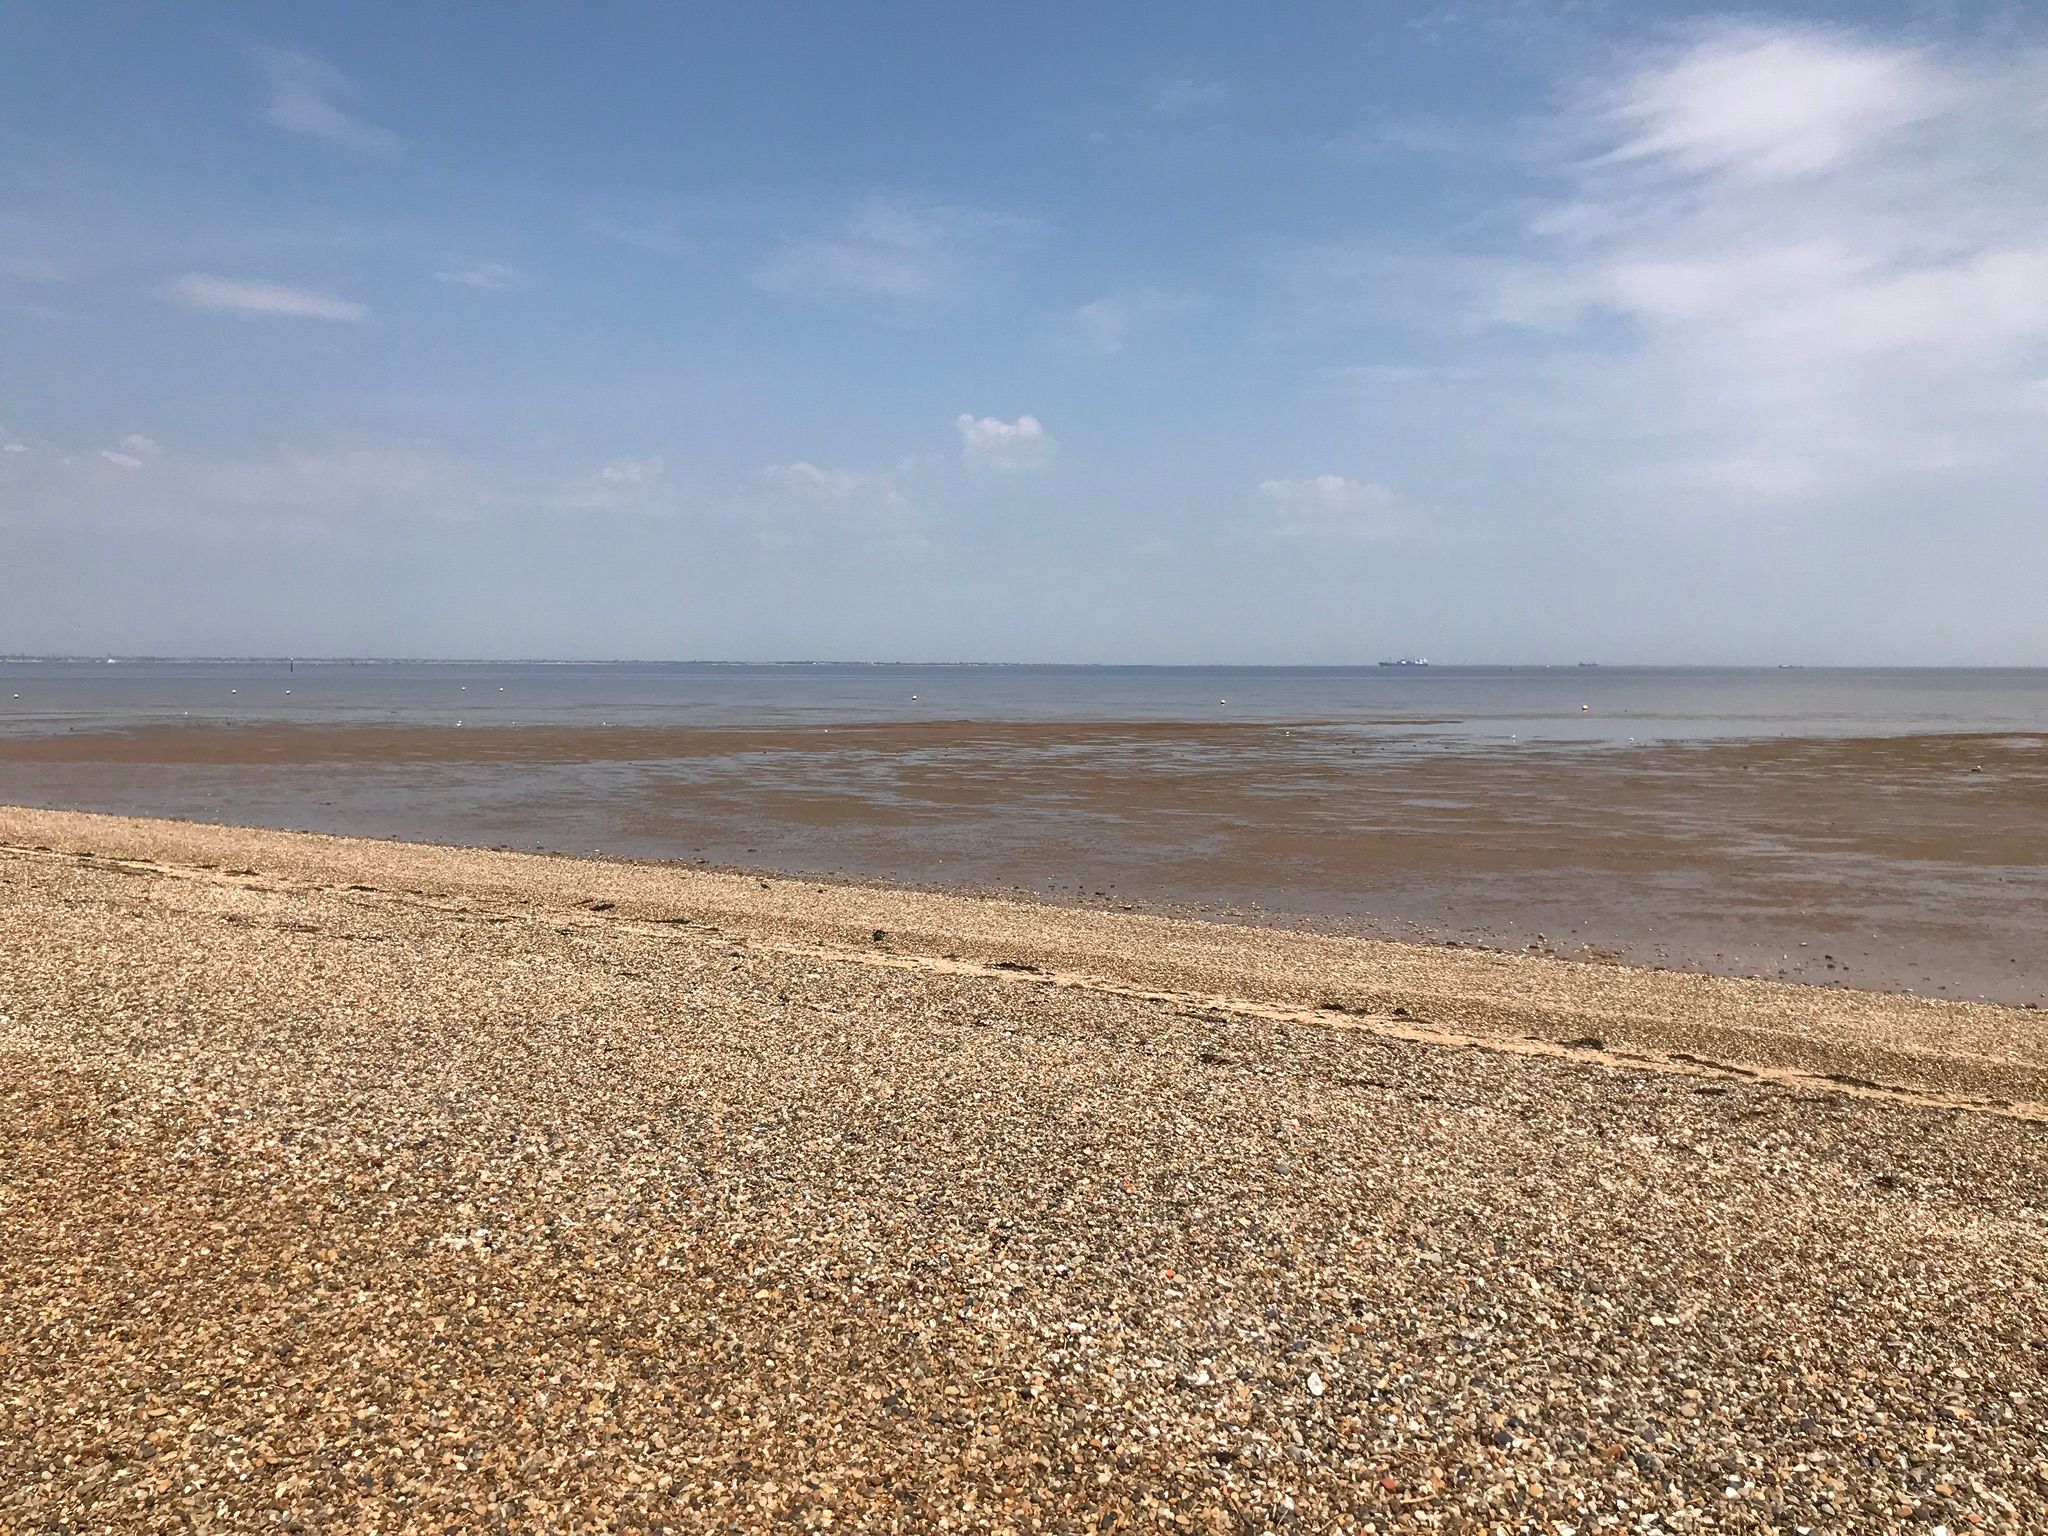 View across the shingle beach out to the water